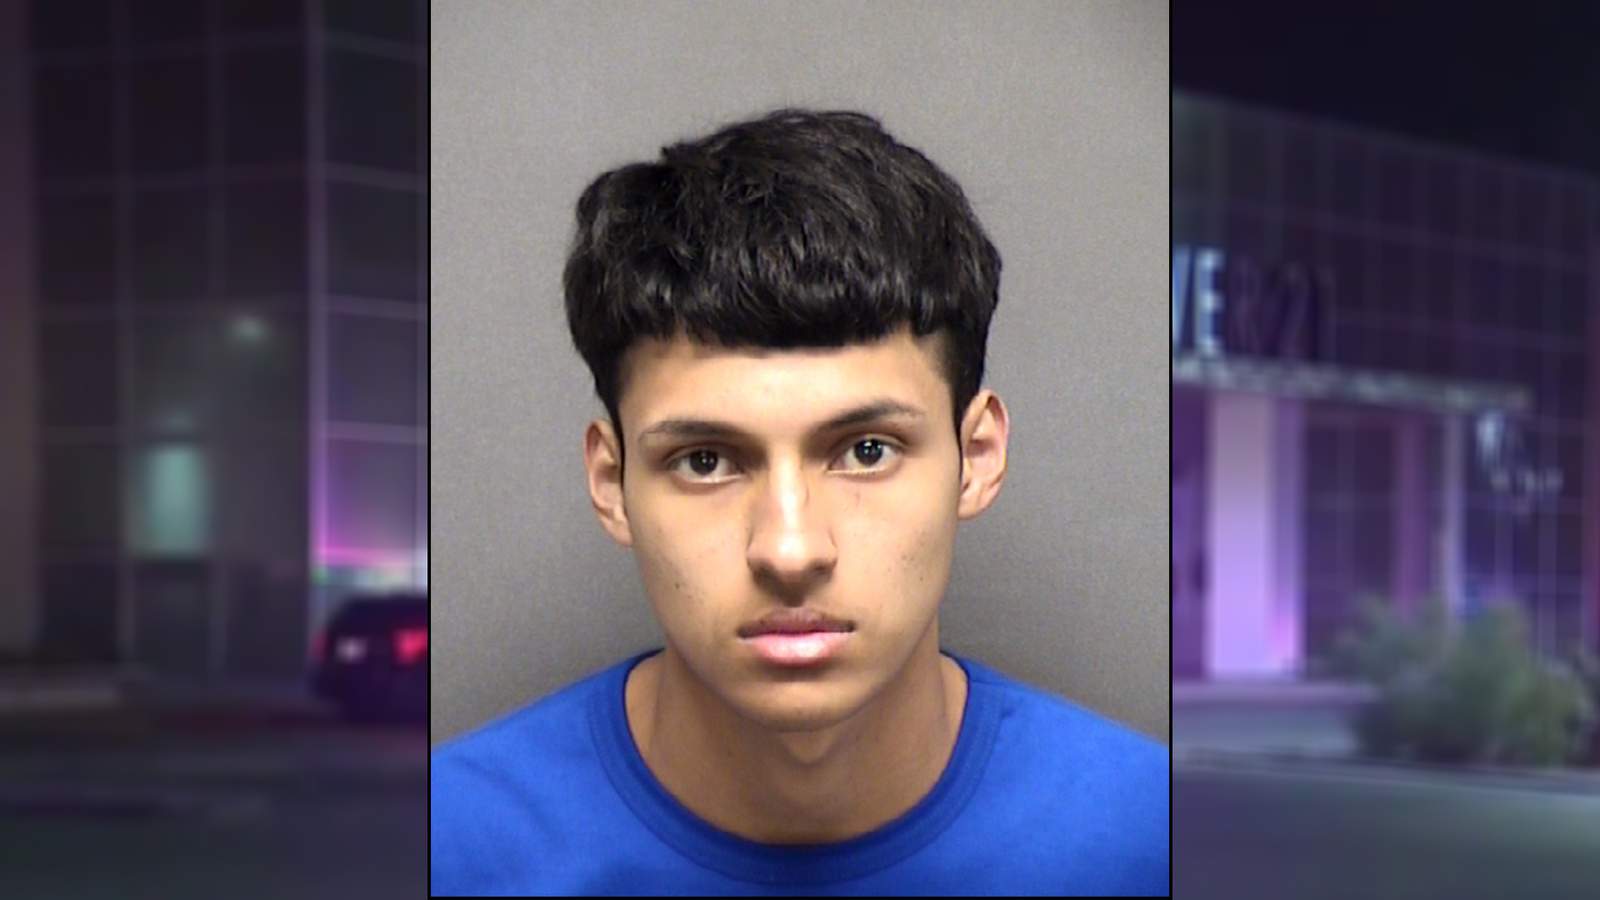 18-year-old suspect arrested in North Star Mall stabbings that hospitalized 2 teens